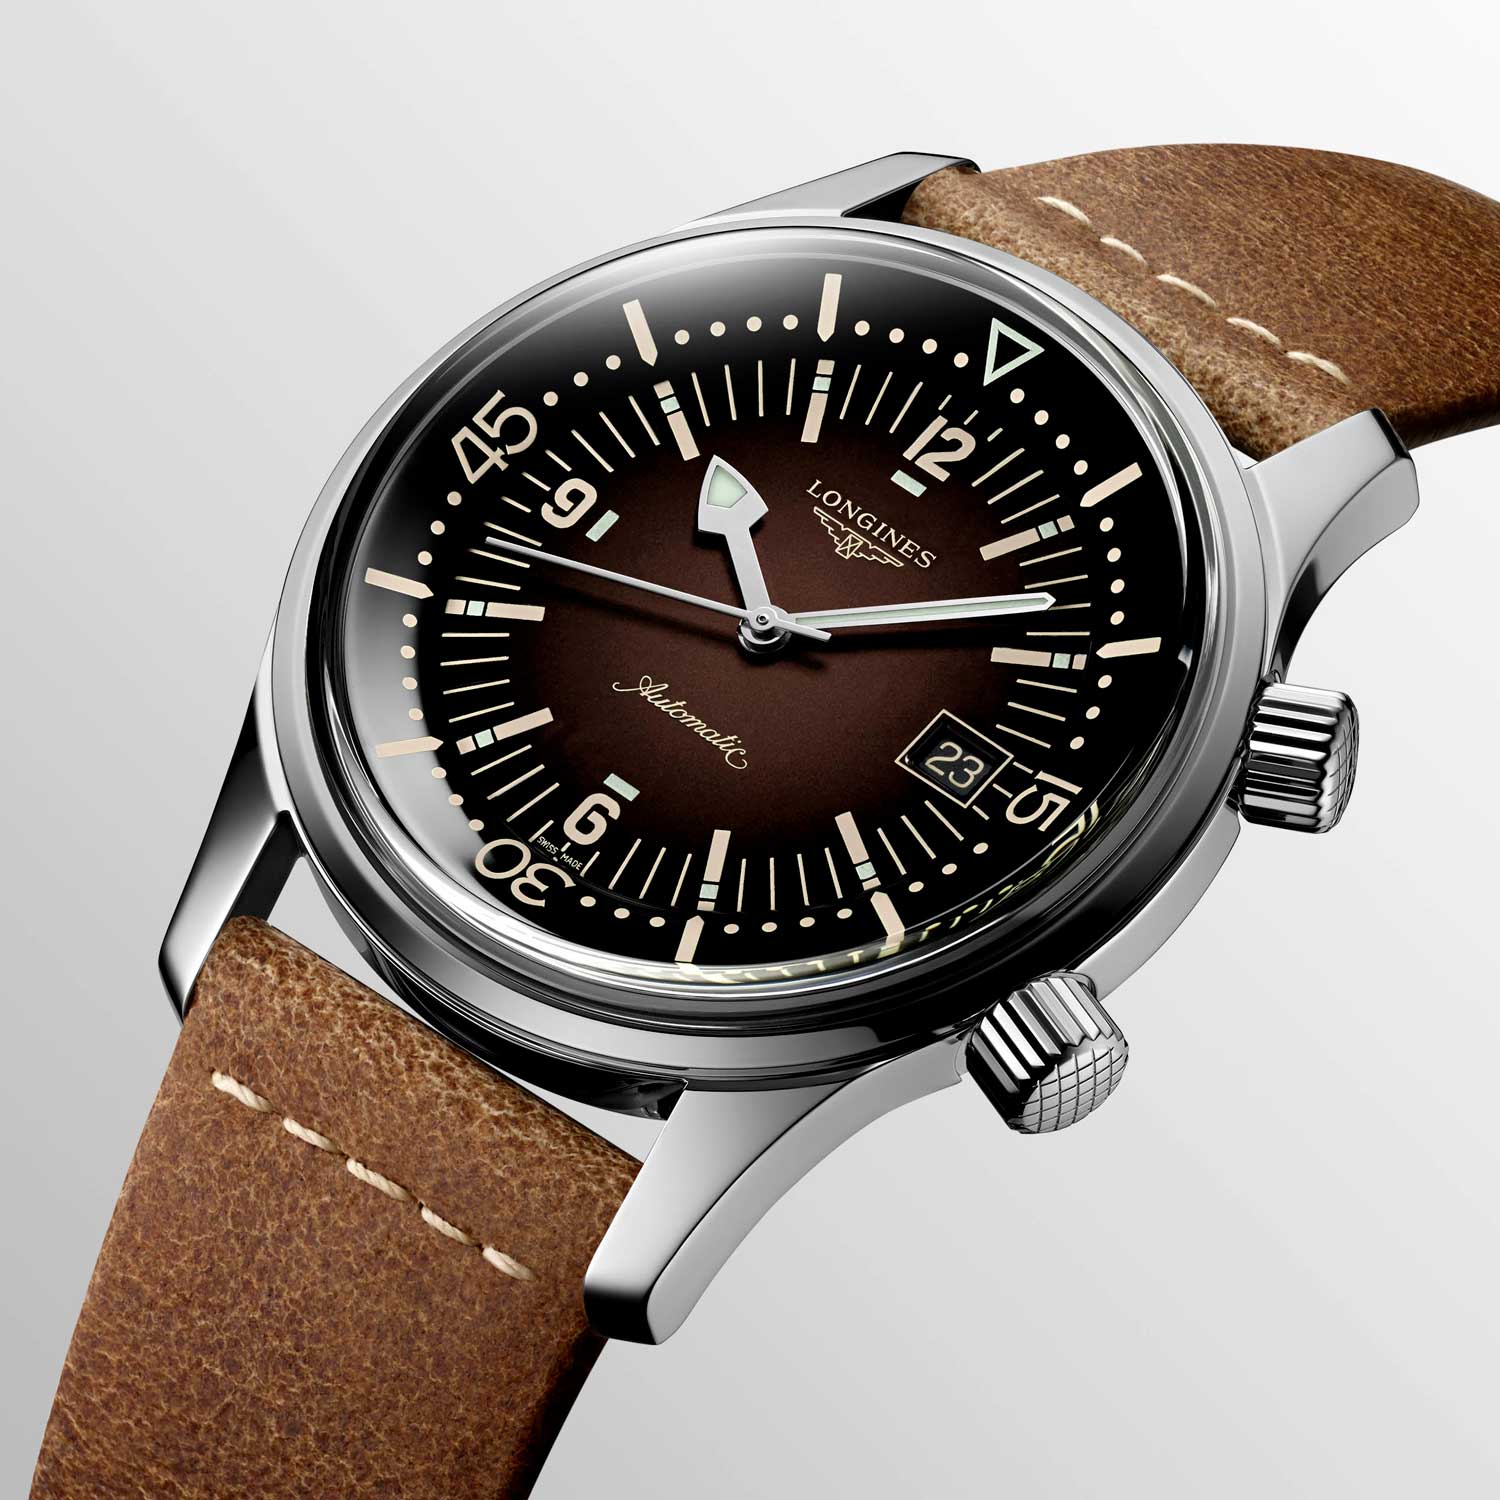 One of the first divers’ watches designed by Longines, the Legend Diver is now available in blue or brown variations